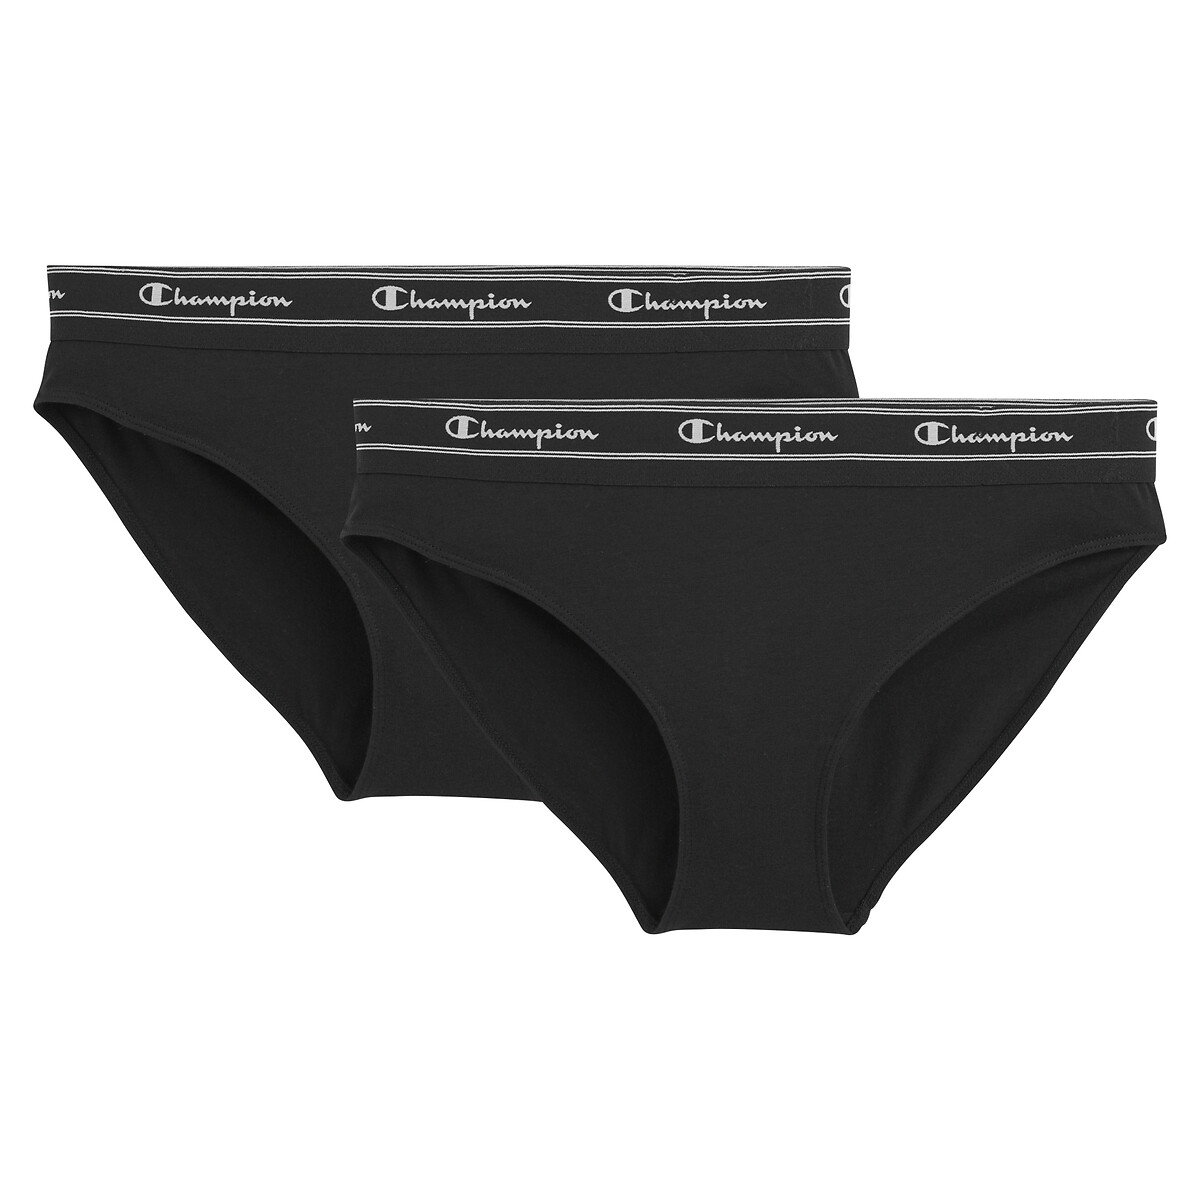 Pack of 2 sports knickers in cotton mix, black, Champion